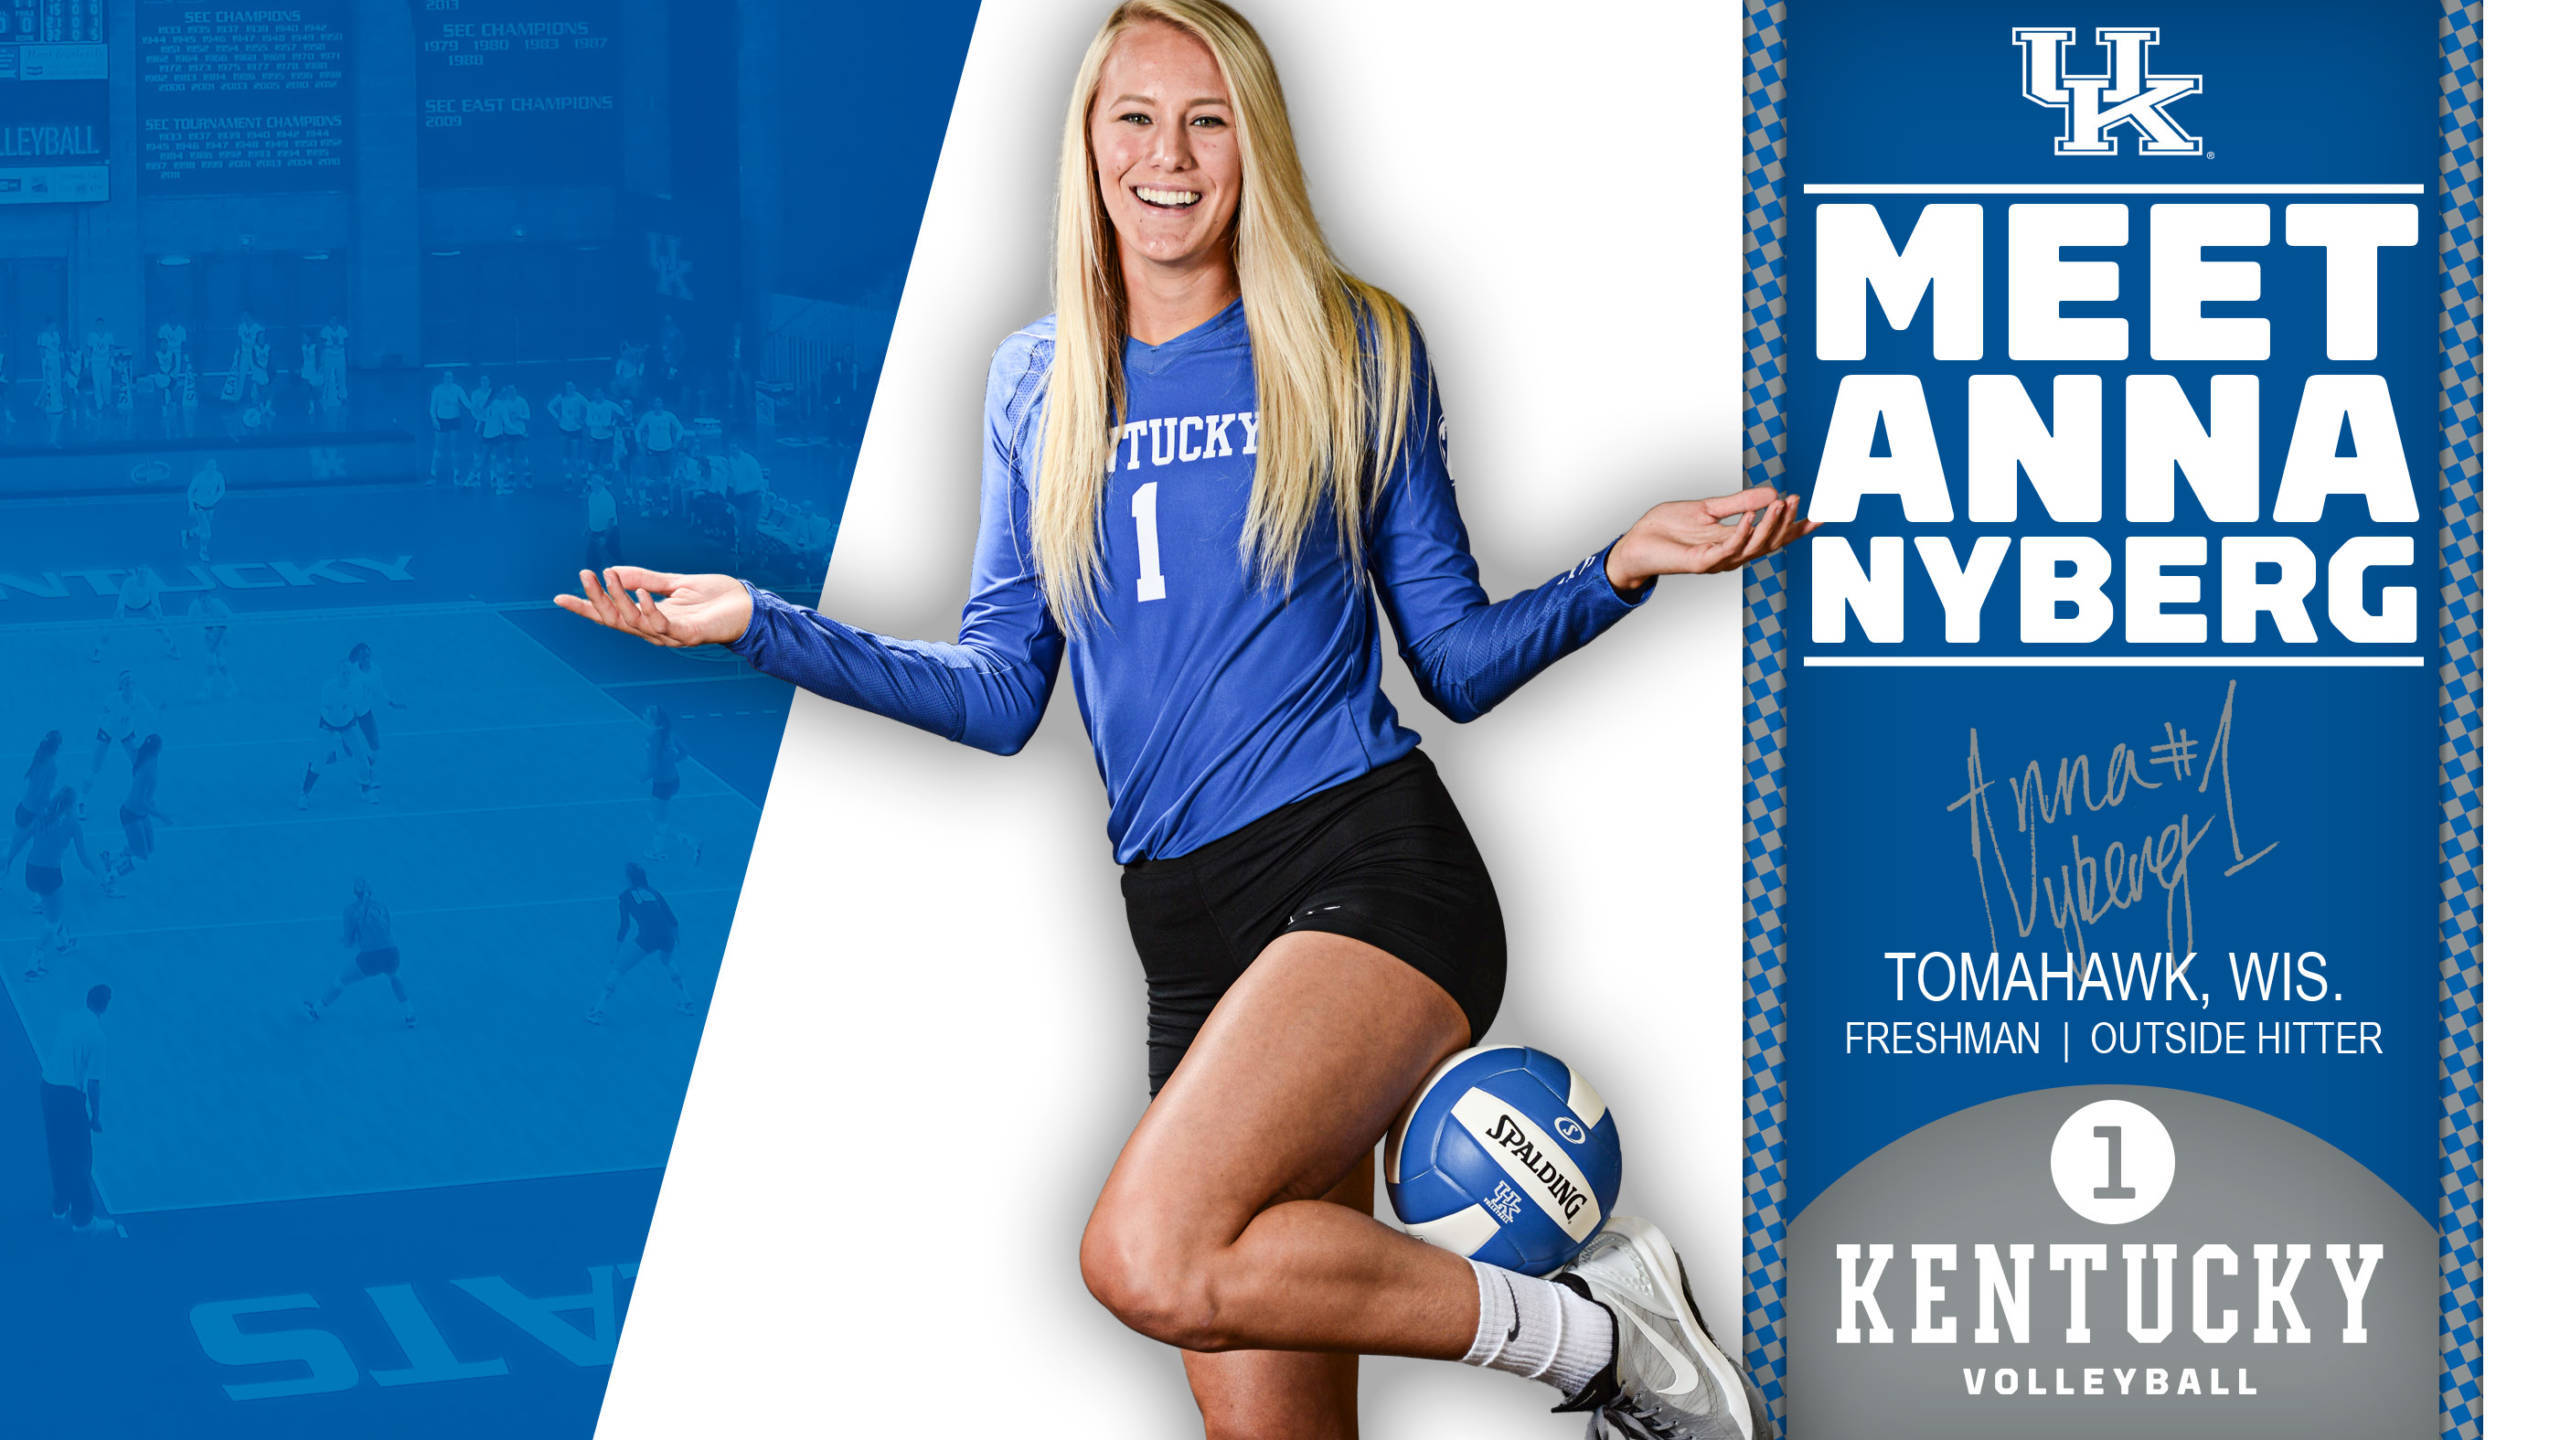 Getting to Know Your Wildcats: Meet Anna Nyberg